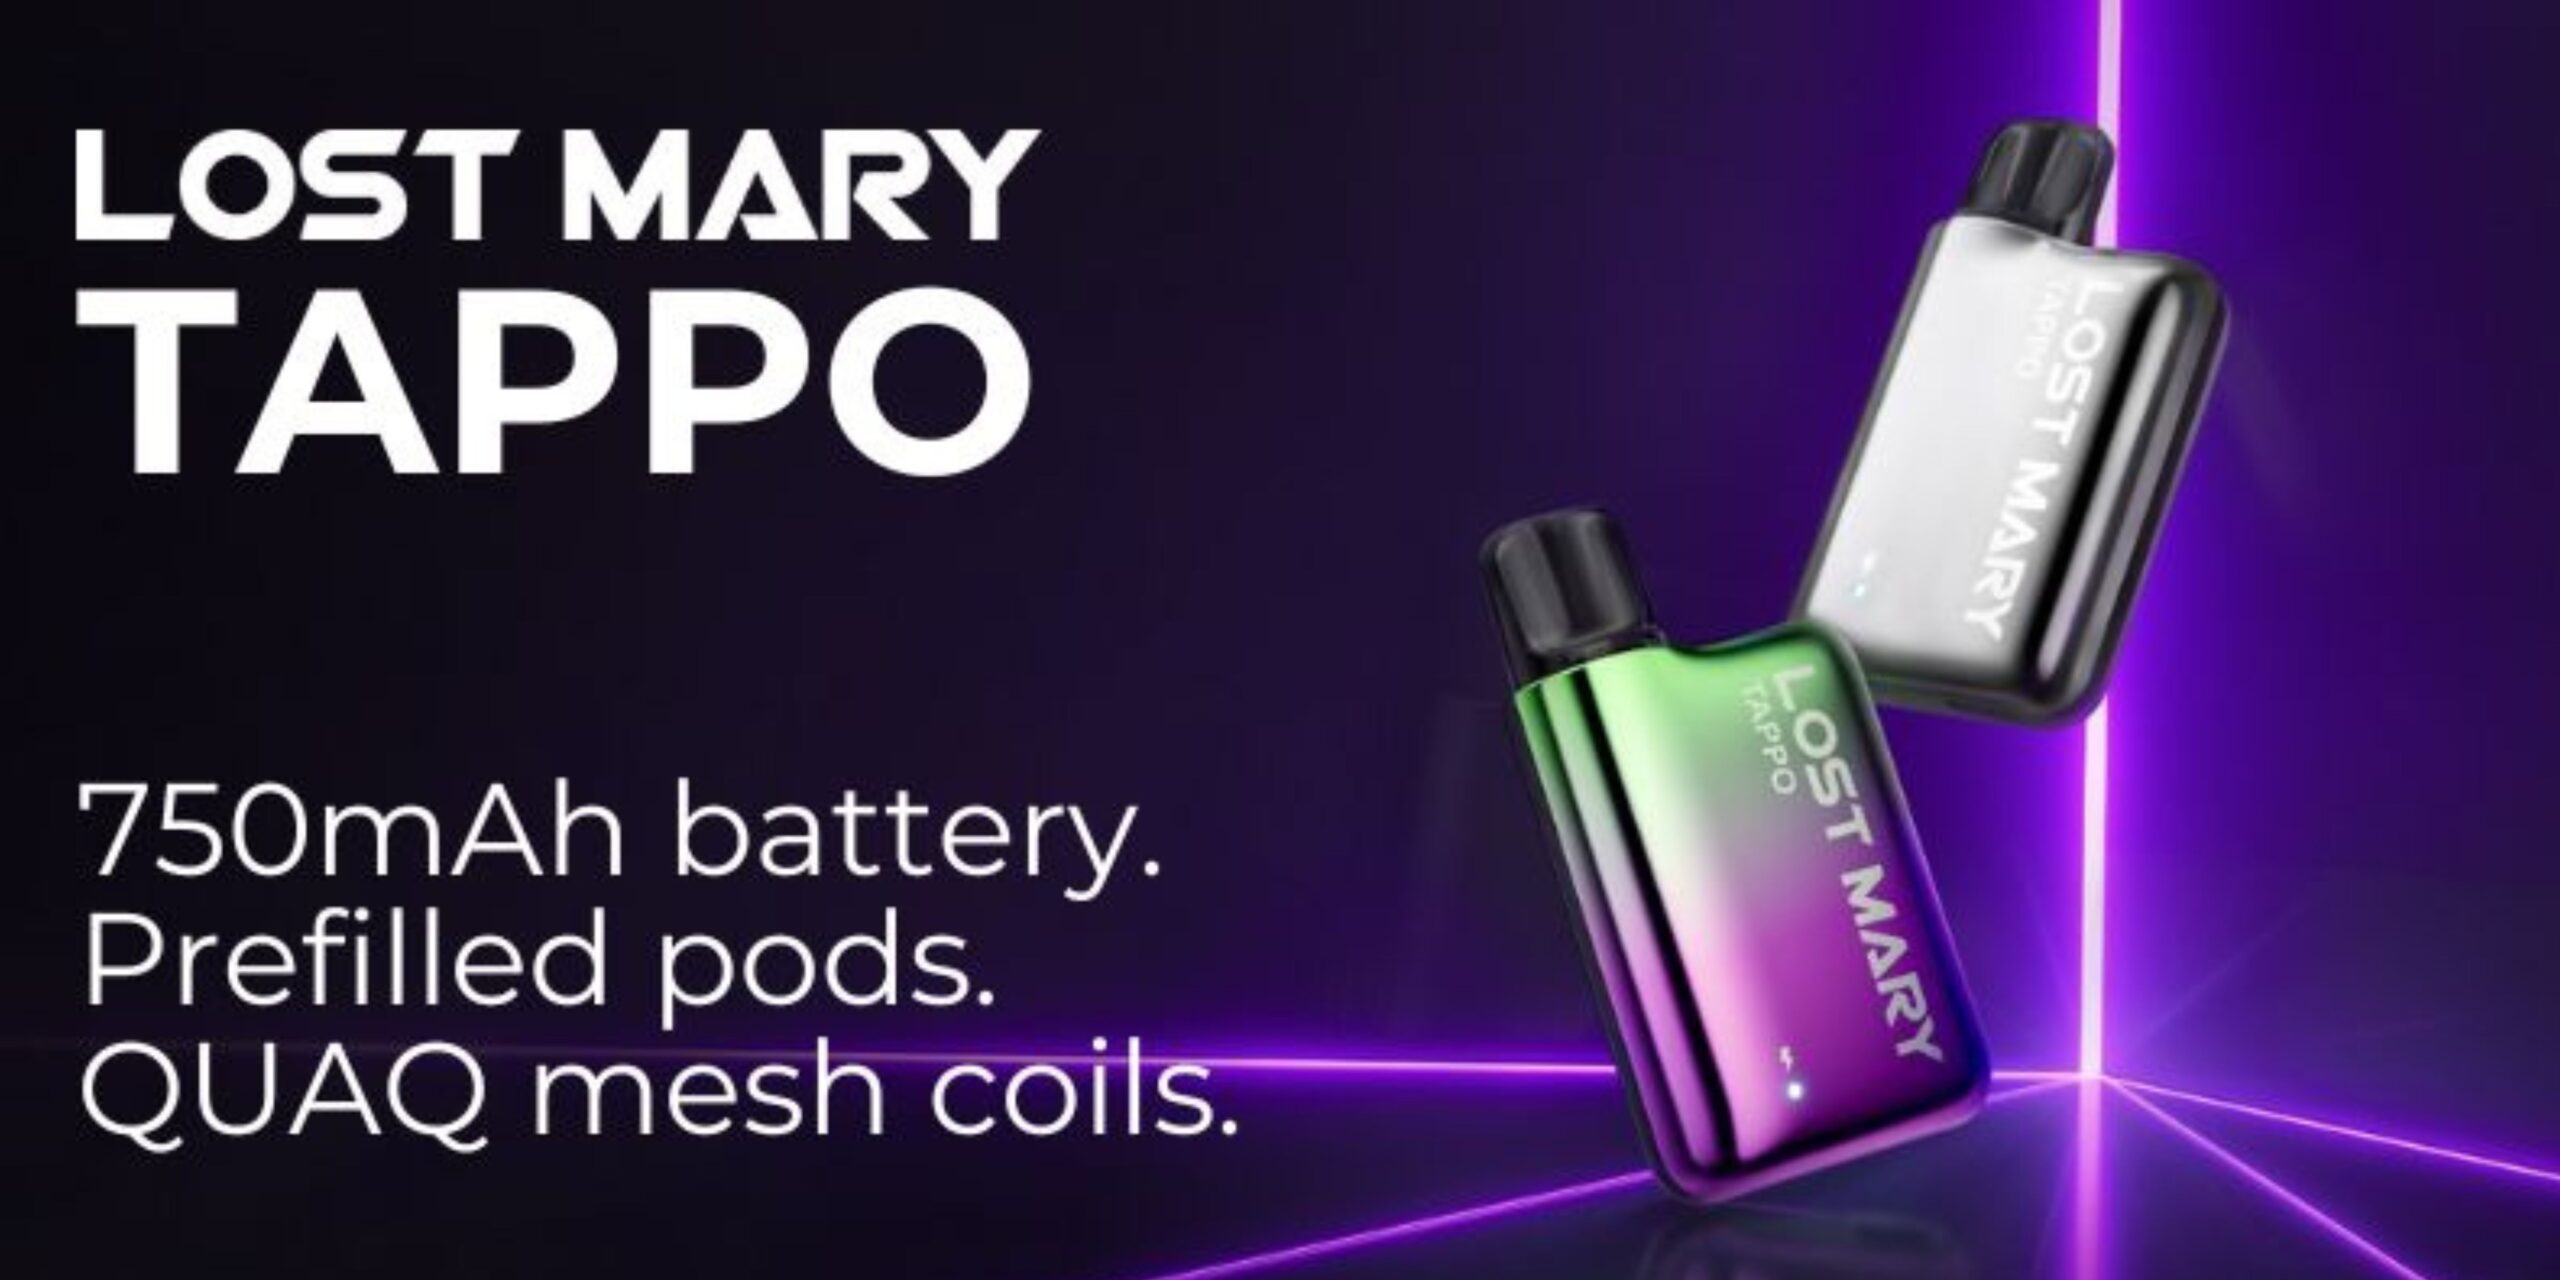 LOST MARY TAPPO – Strawberry Raspberry (Replacement Prefilled Pods) VAPING - XMANIA Ireland 14